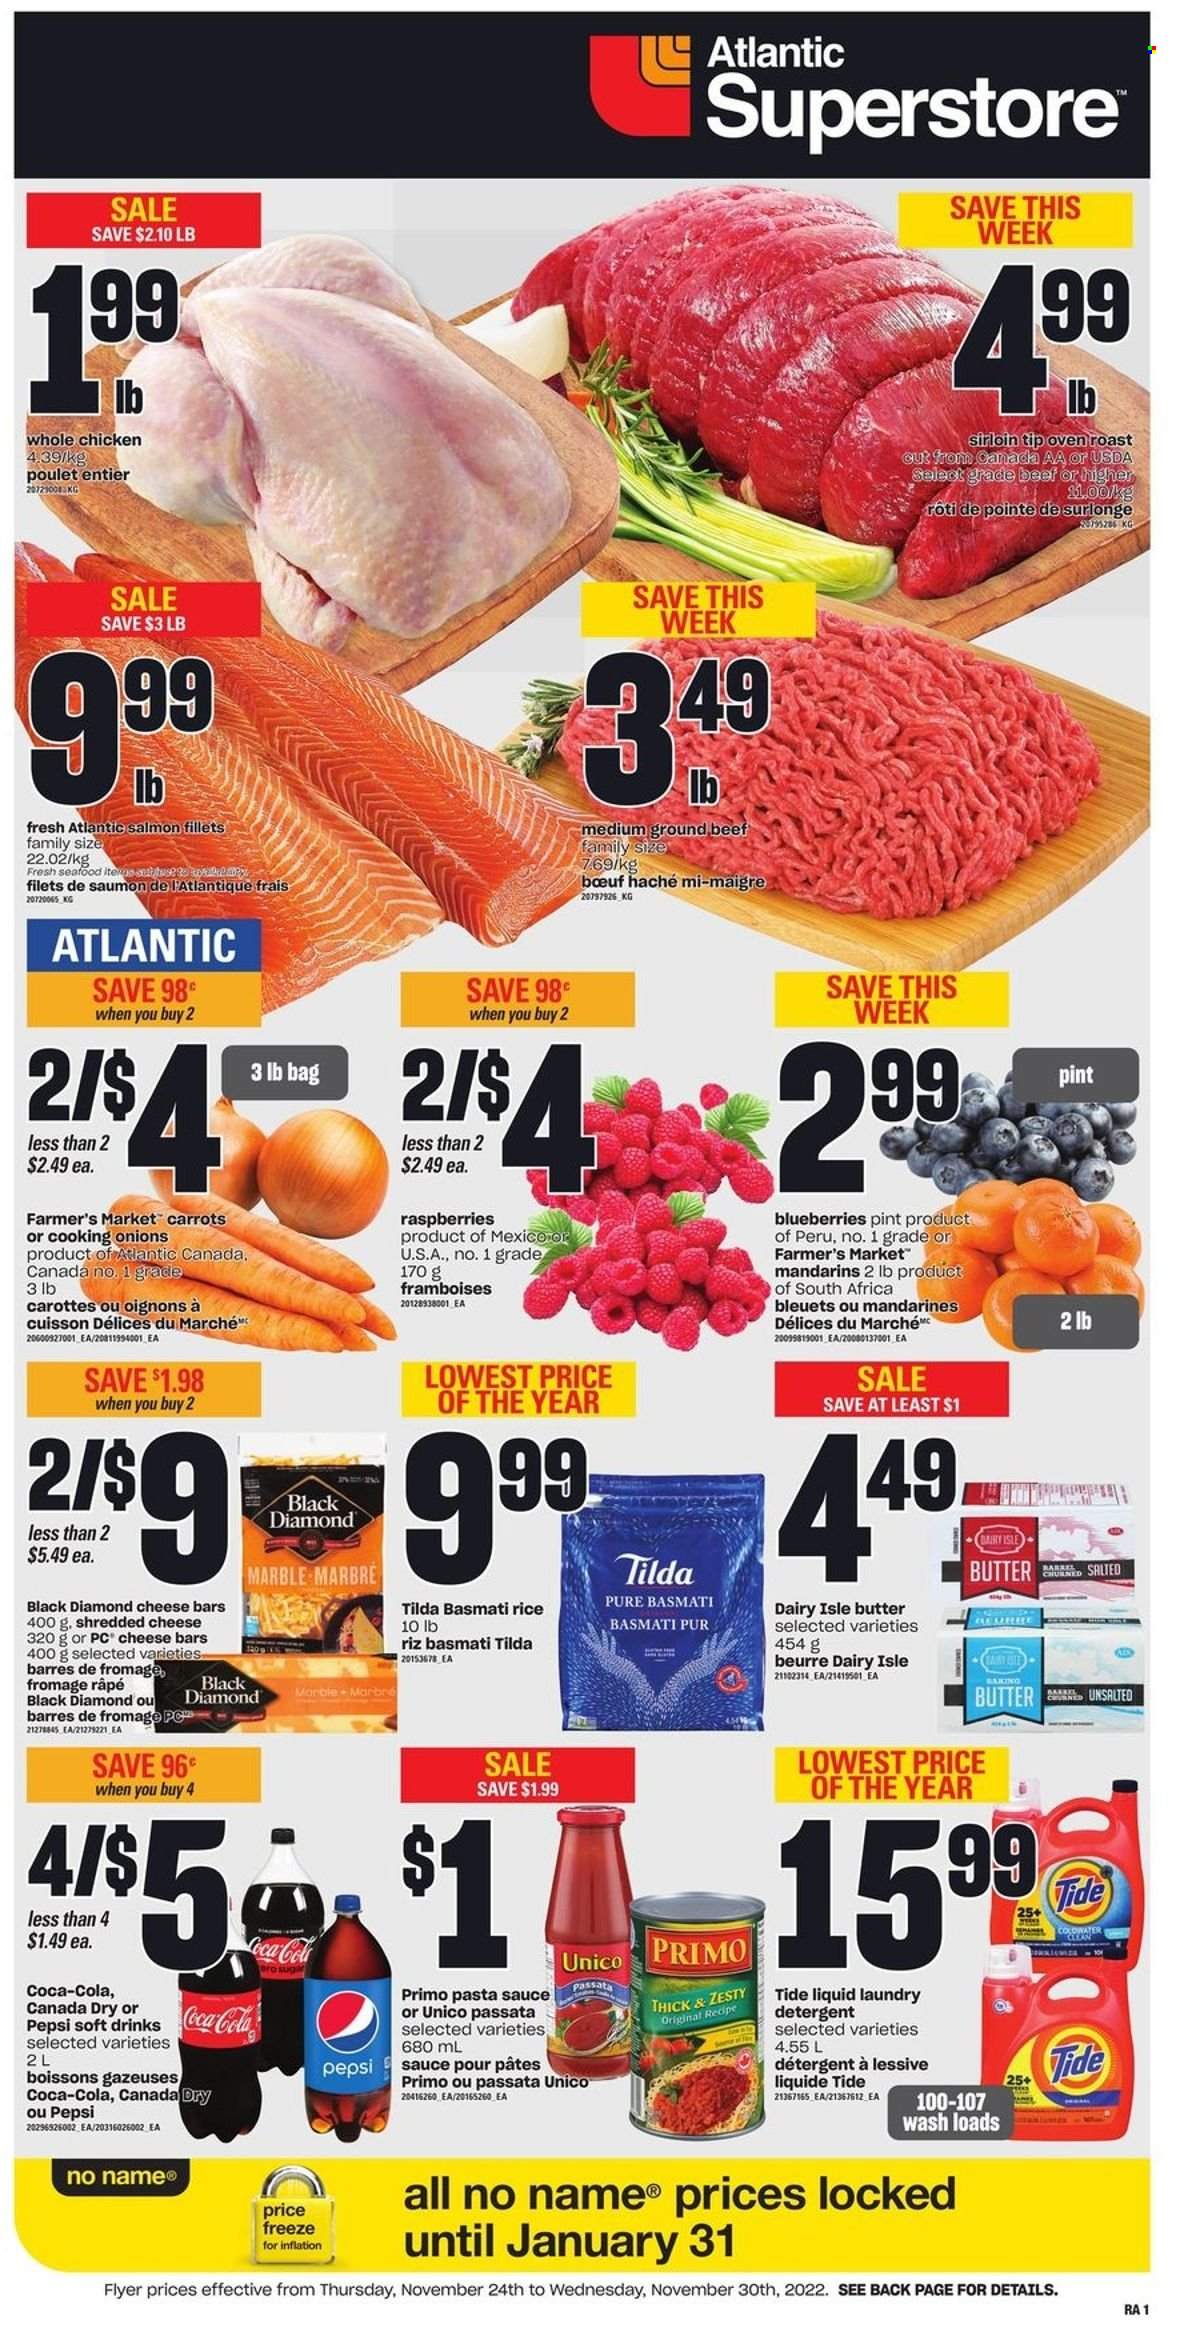 thumbnail - Atlantic Superstore Flyer - November 24, 2022 - November 30, 2022 - Sales products - onion, blueberries, mandarines, salmon, salmon fillet, seafood, No Name, pasta sauce, shredded cheese, butter, basmati rice, rice, Canada Dry, Coca-Cola, Pepsi, soft drink, whole chicken, chicken, beef meat, ground beef, Tide, laundry detergent, detergent. Page 1.